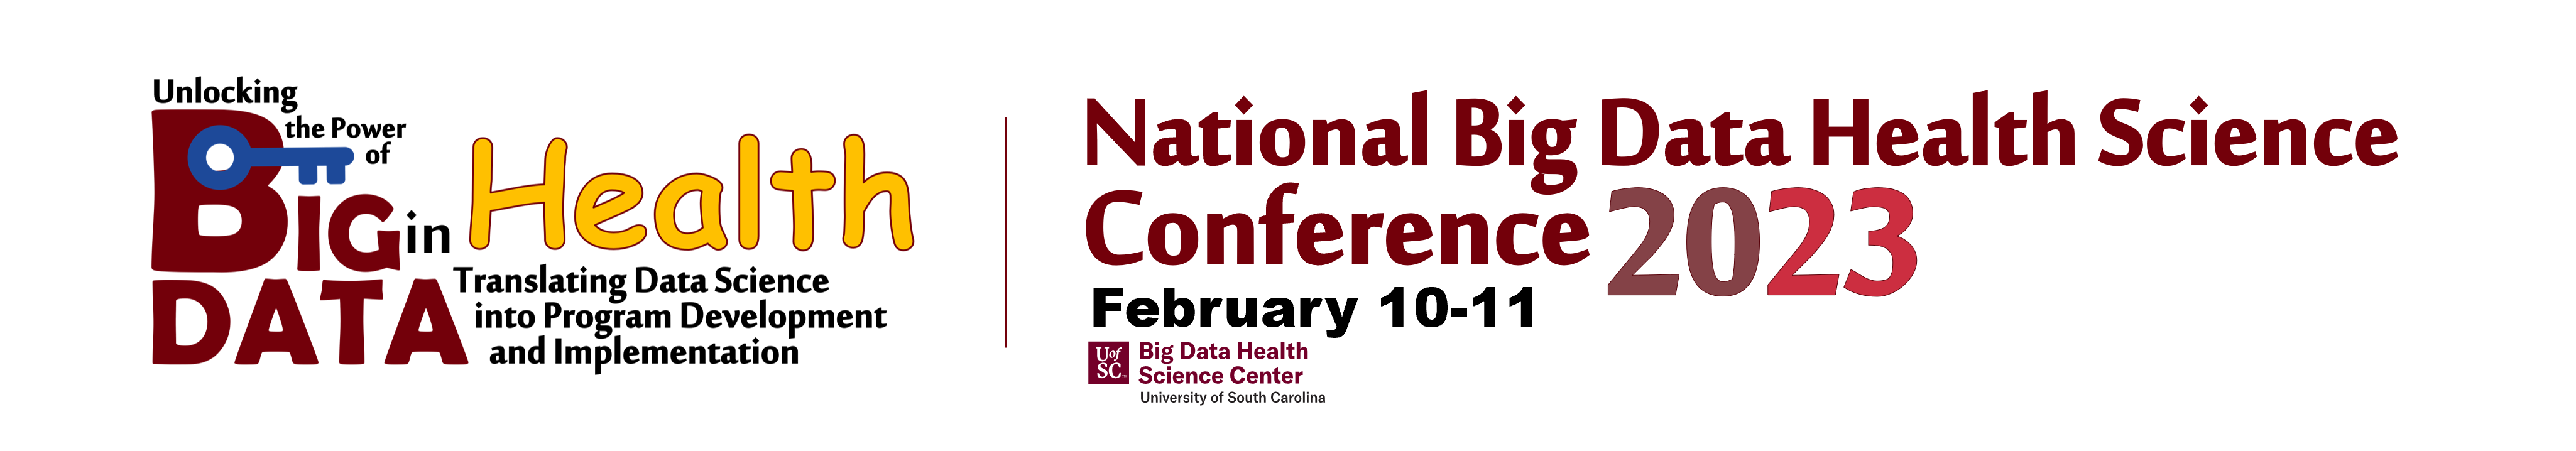 SC Big Data Health Science Center Conference 2023